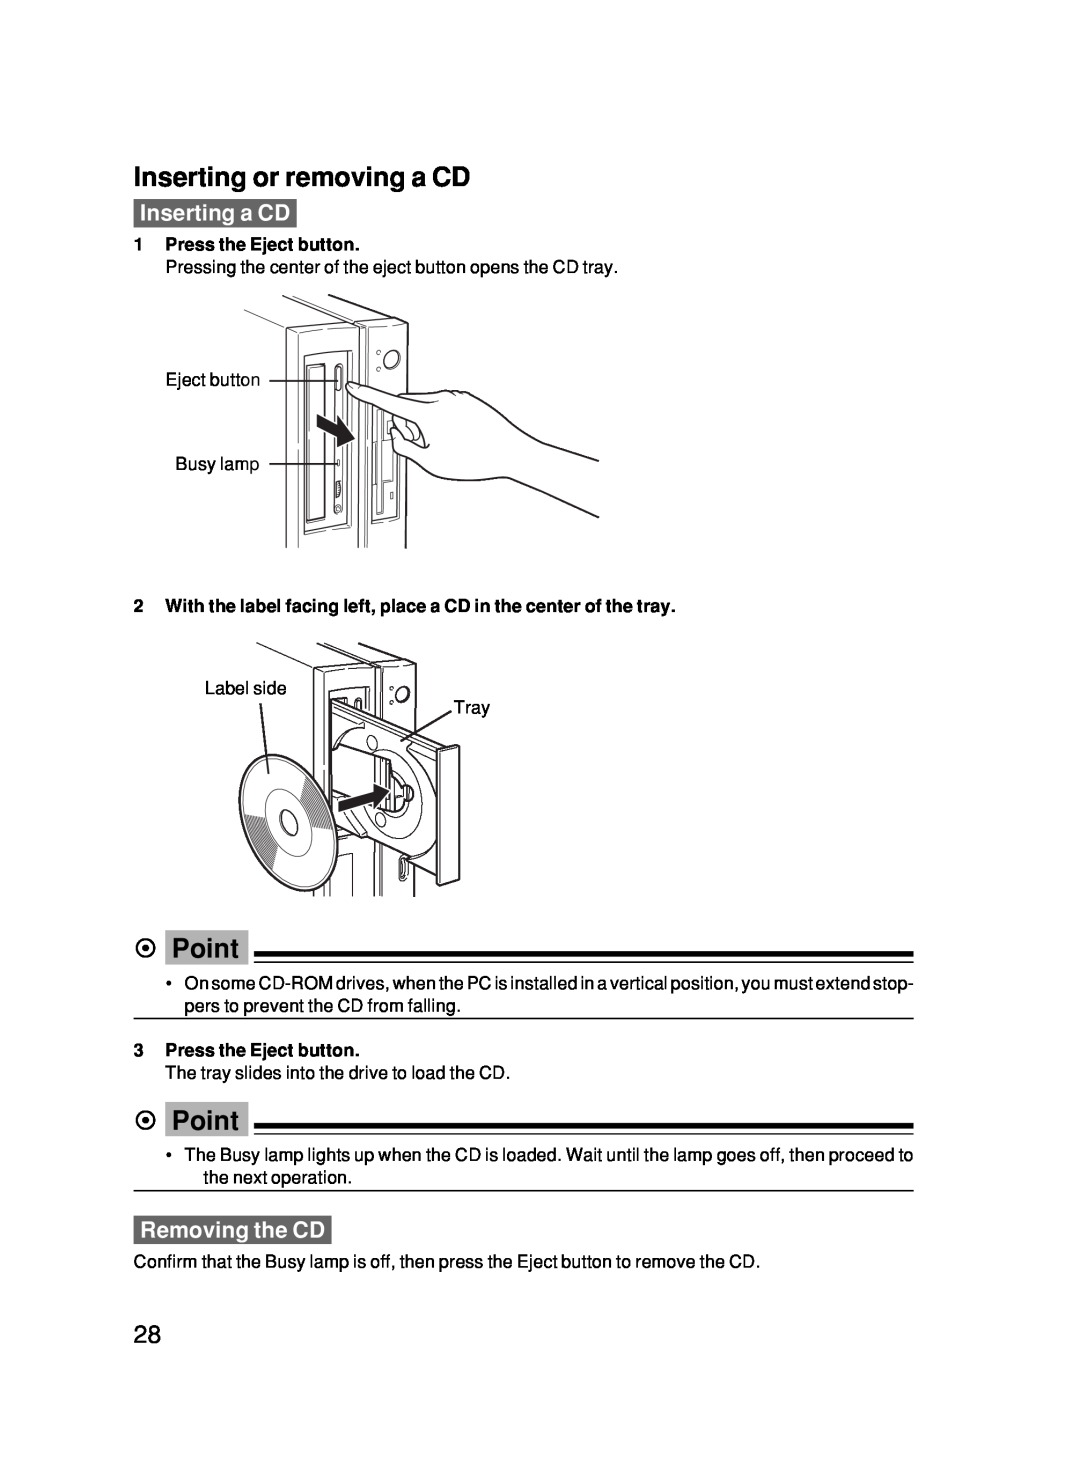 Fujitsu 500 user manual Inserting or removing a CD, Inserting a CD, Removing the CD, Press the Eject button, Point 